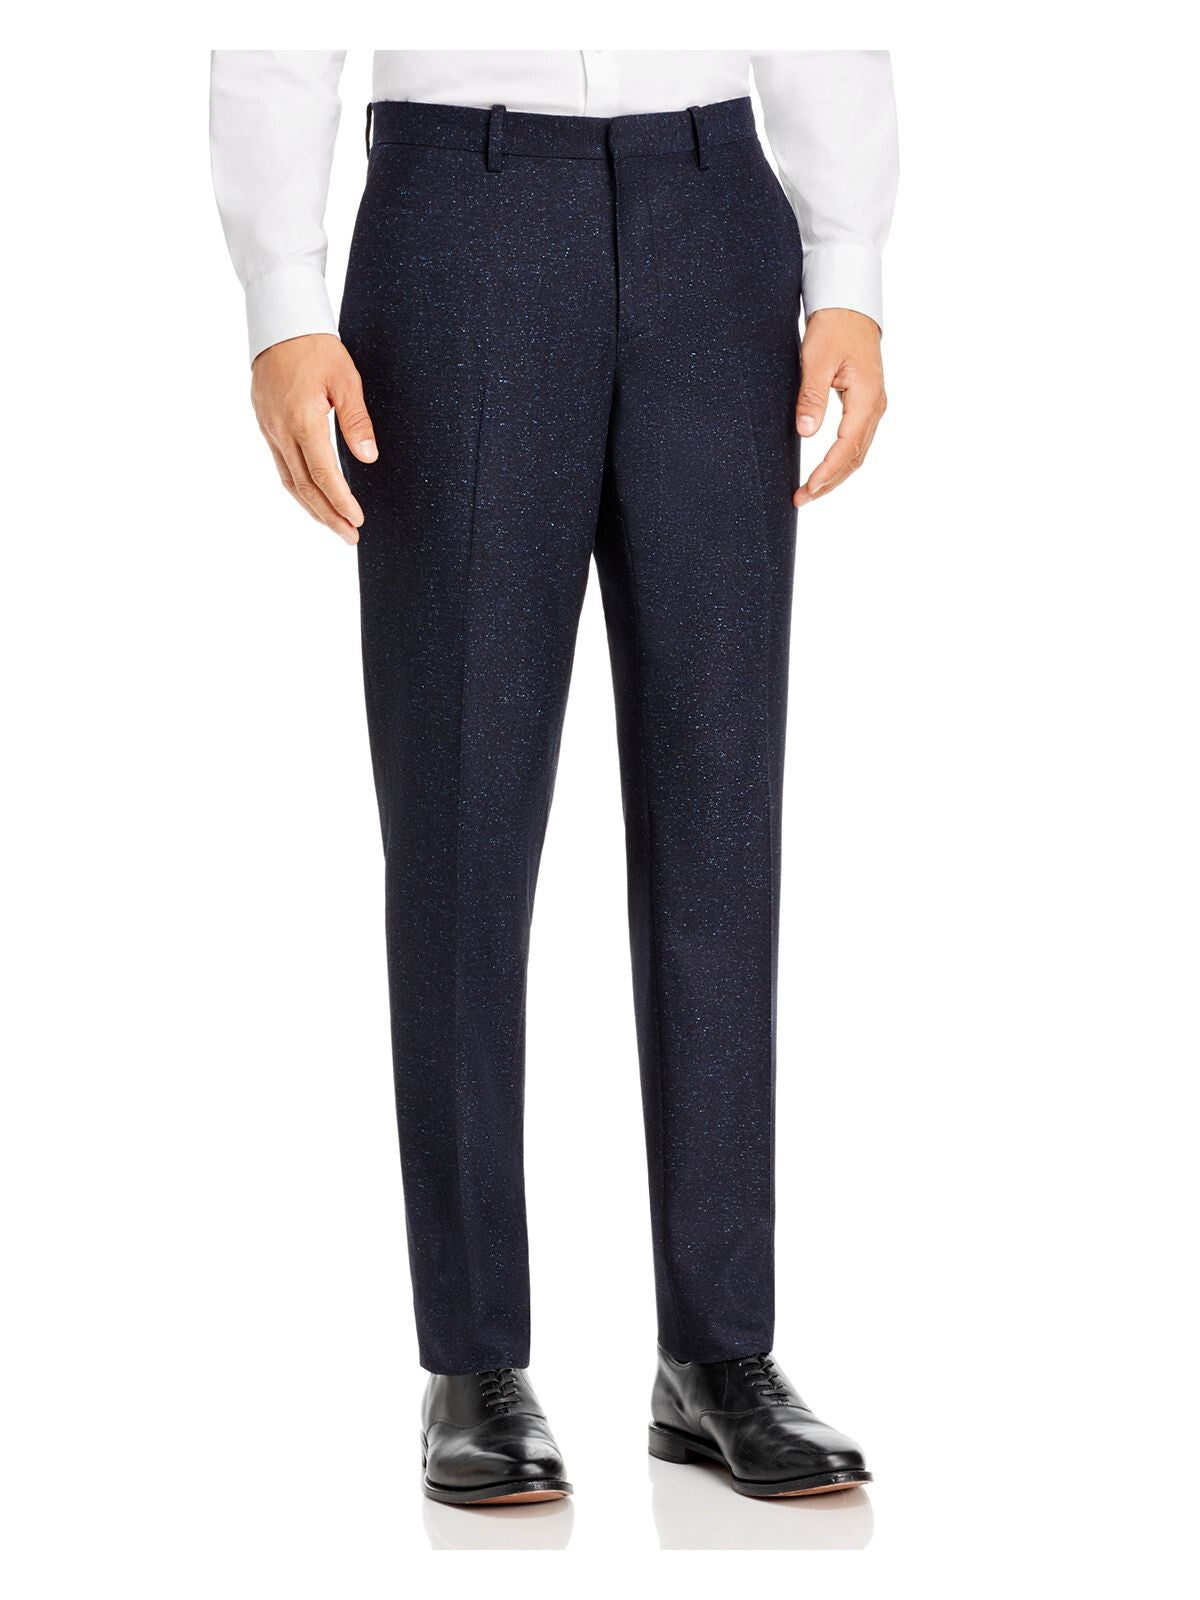 THEORY Mens Mayer Bowen Blue Flat Front, Tapered, Speckle Classic Fit Pants 32